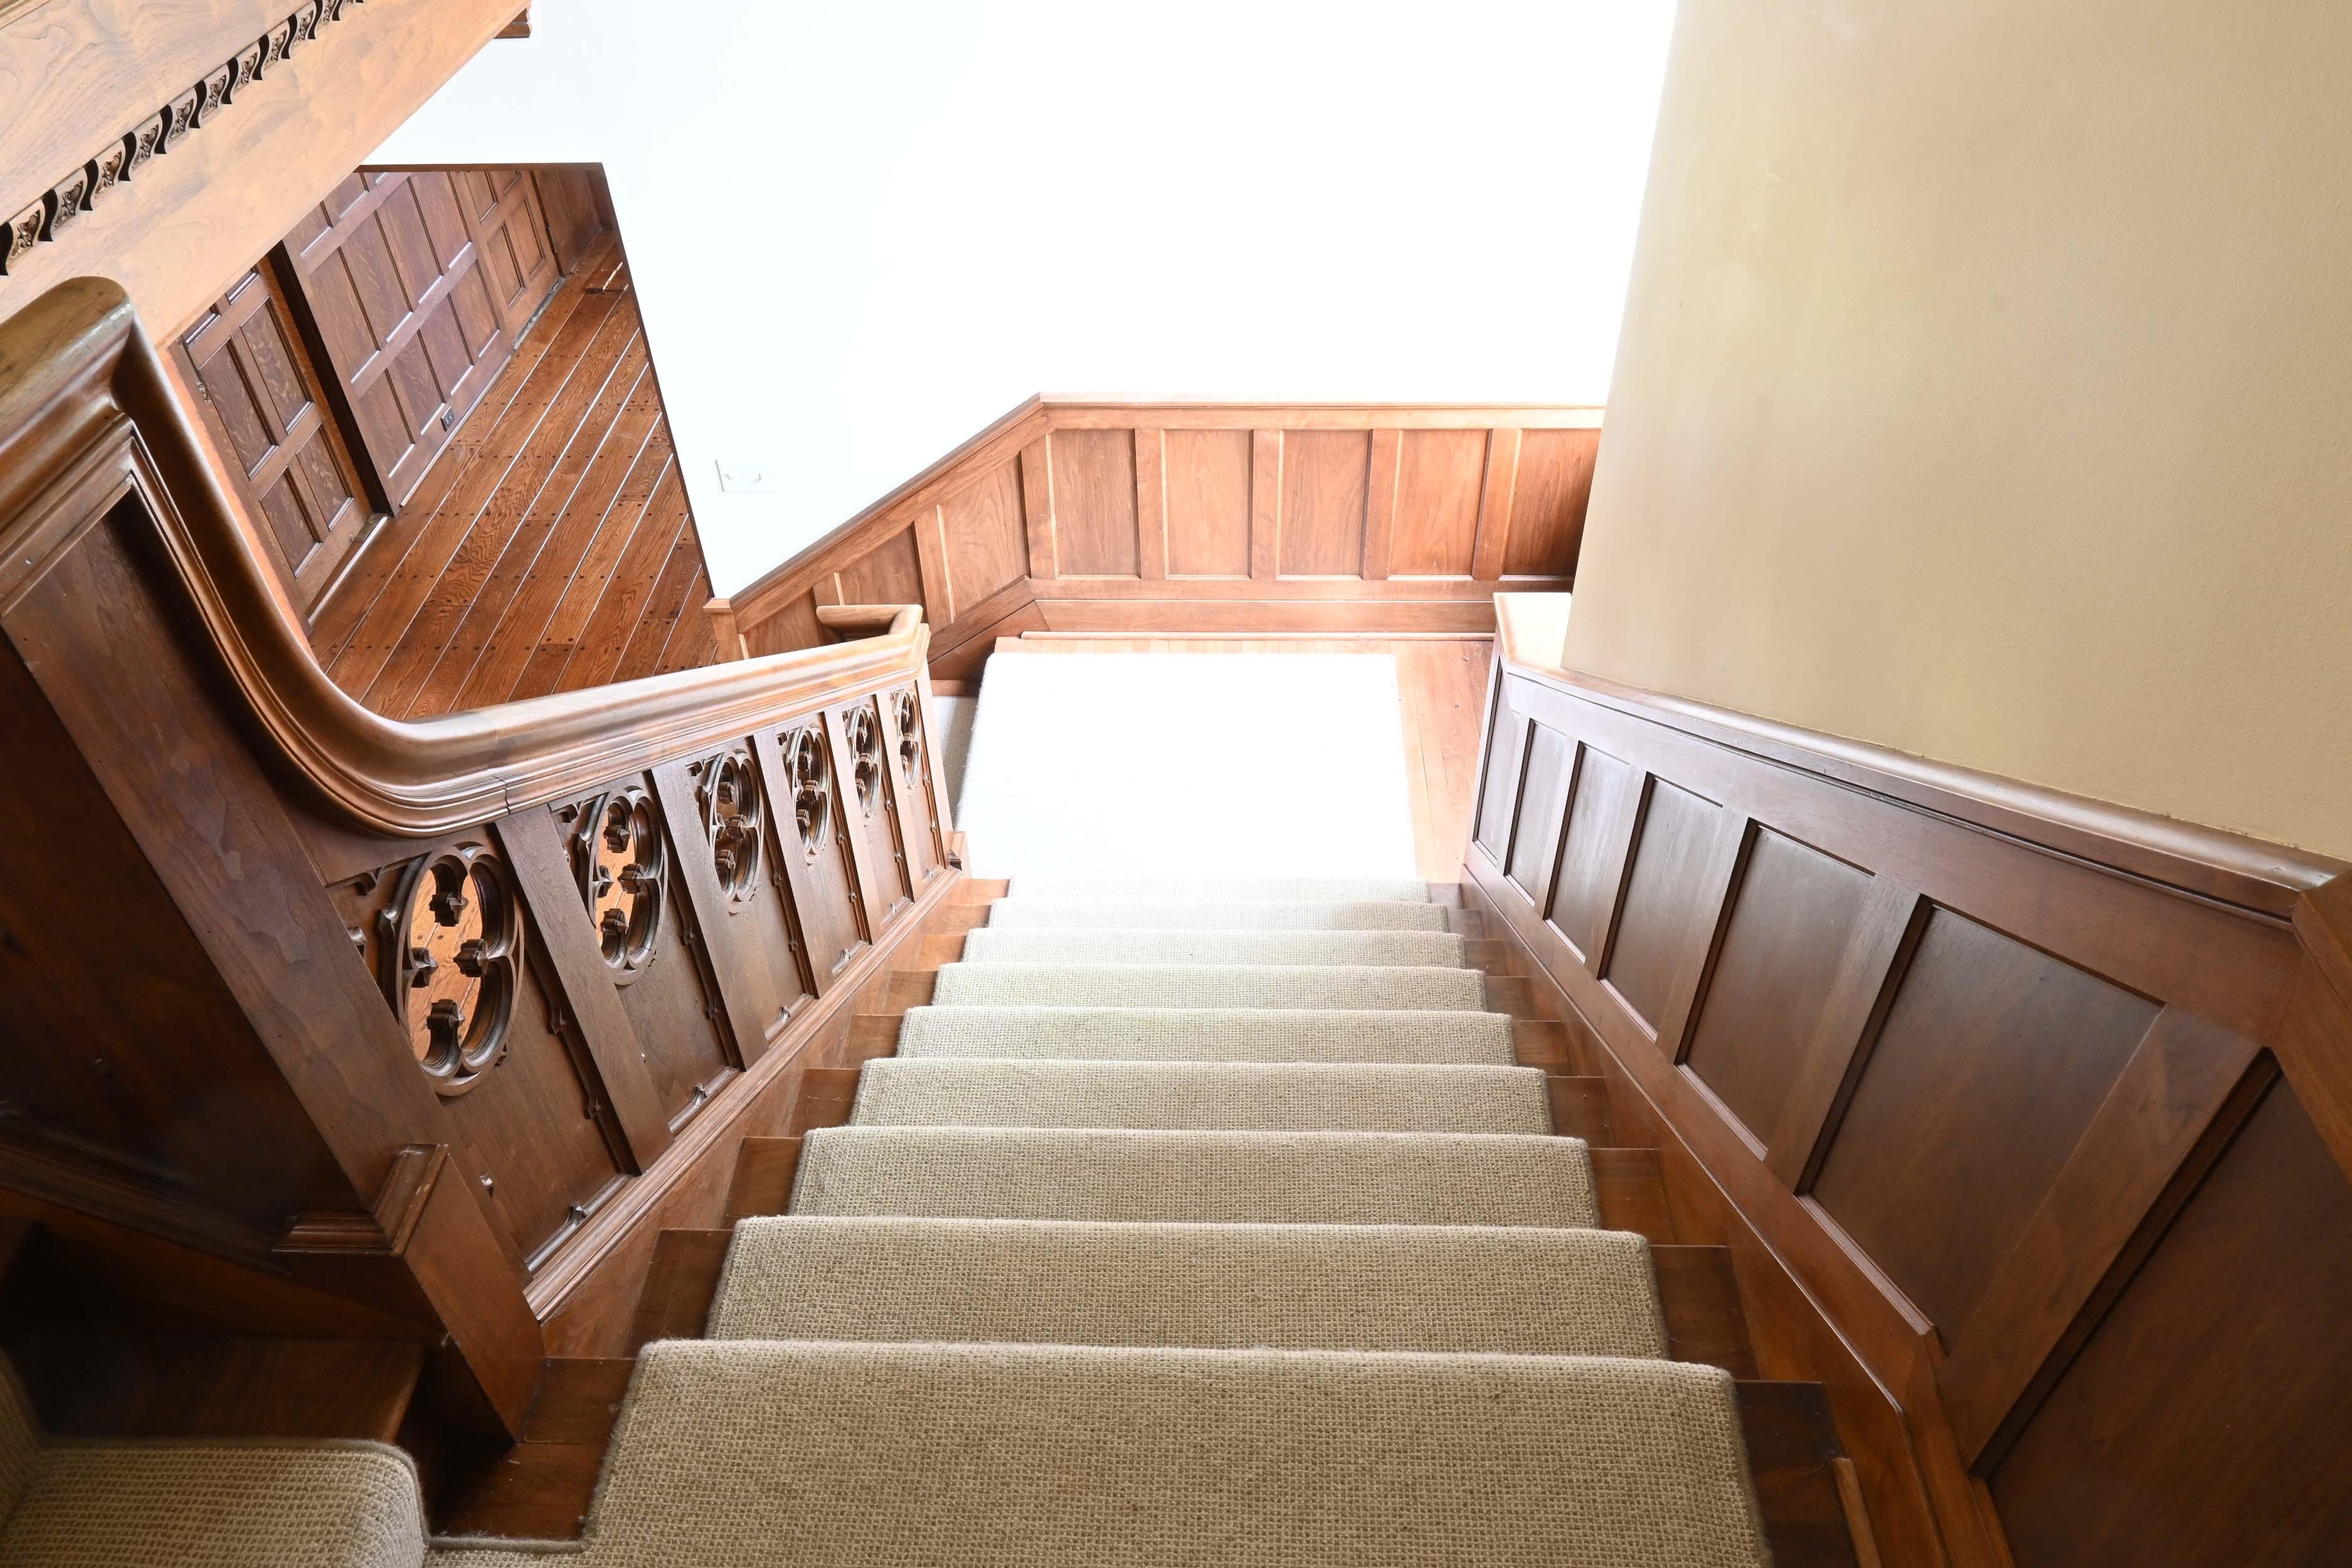 1929 walnut double landing staircase complete with carved paneled Quatrefoil railing & newel
 
AA# 61254

Circa: Deconstructed from a 1929 Minneapolis lake home
Condition: Pristine age consistent wear, meticulously deconstructed & marked for